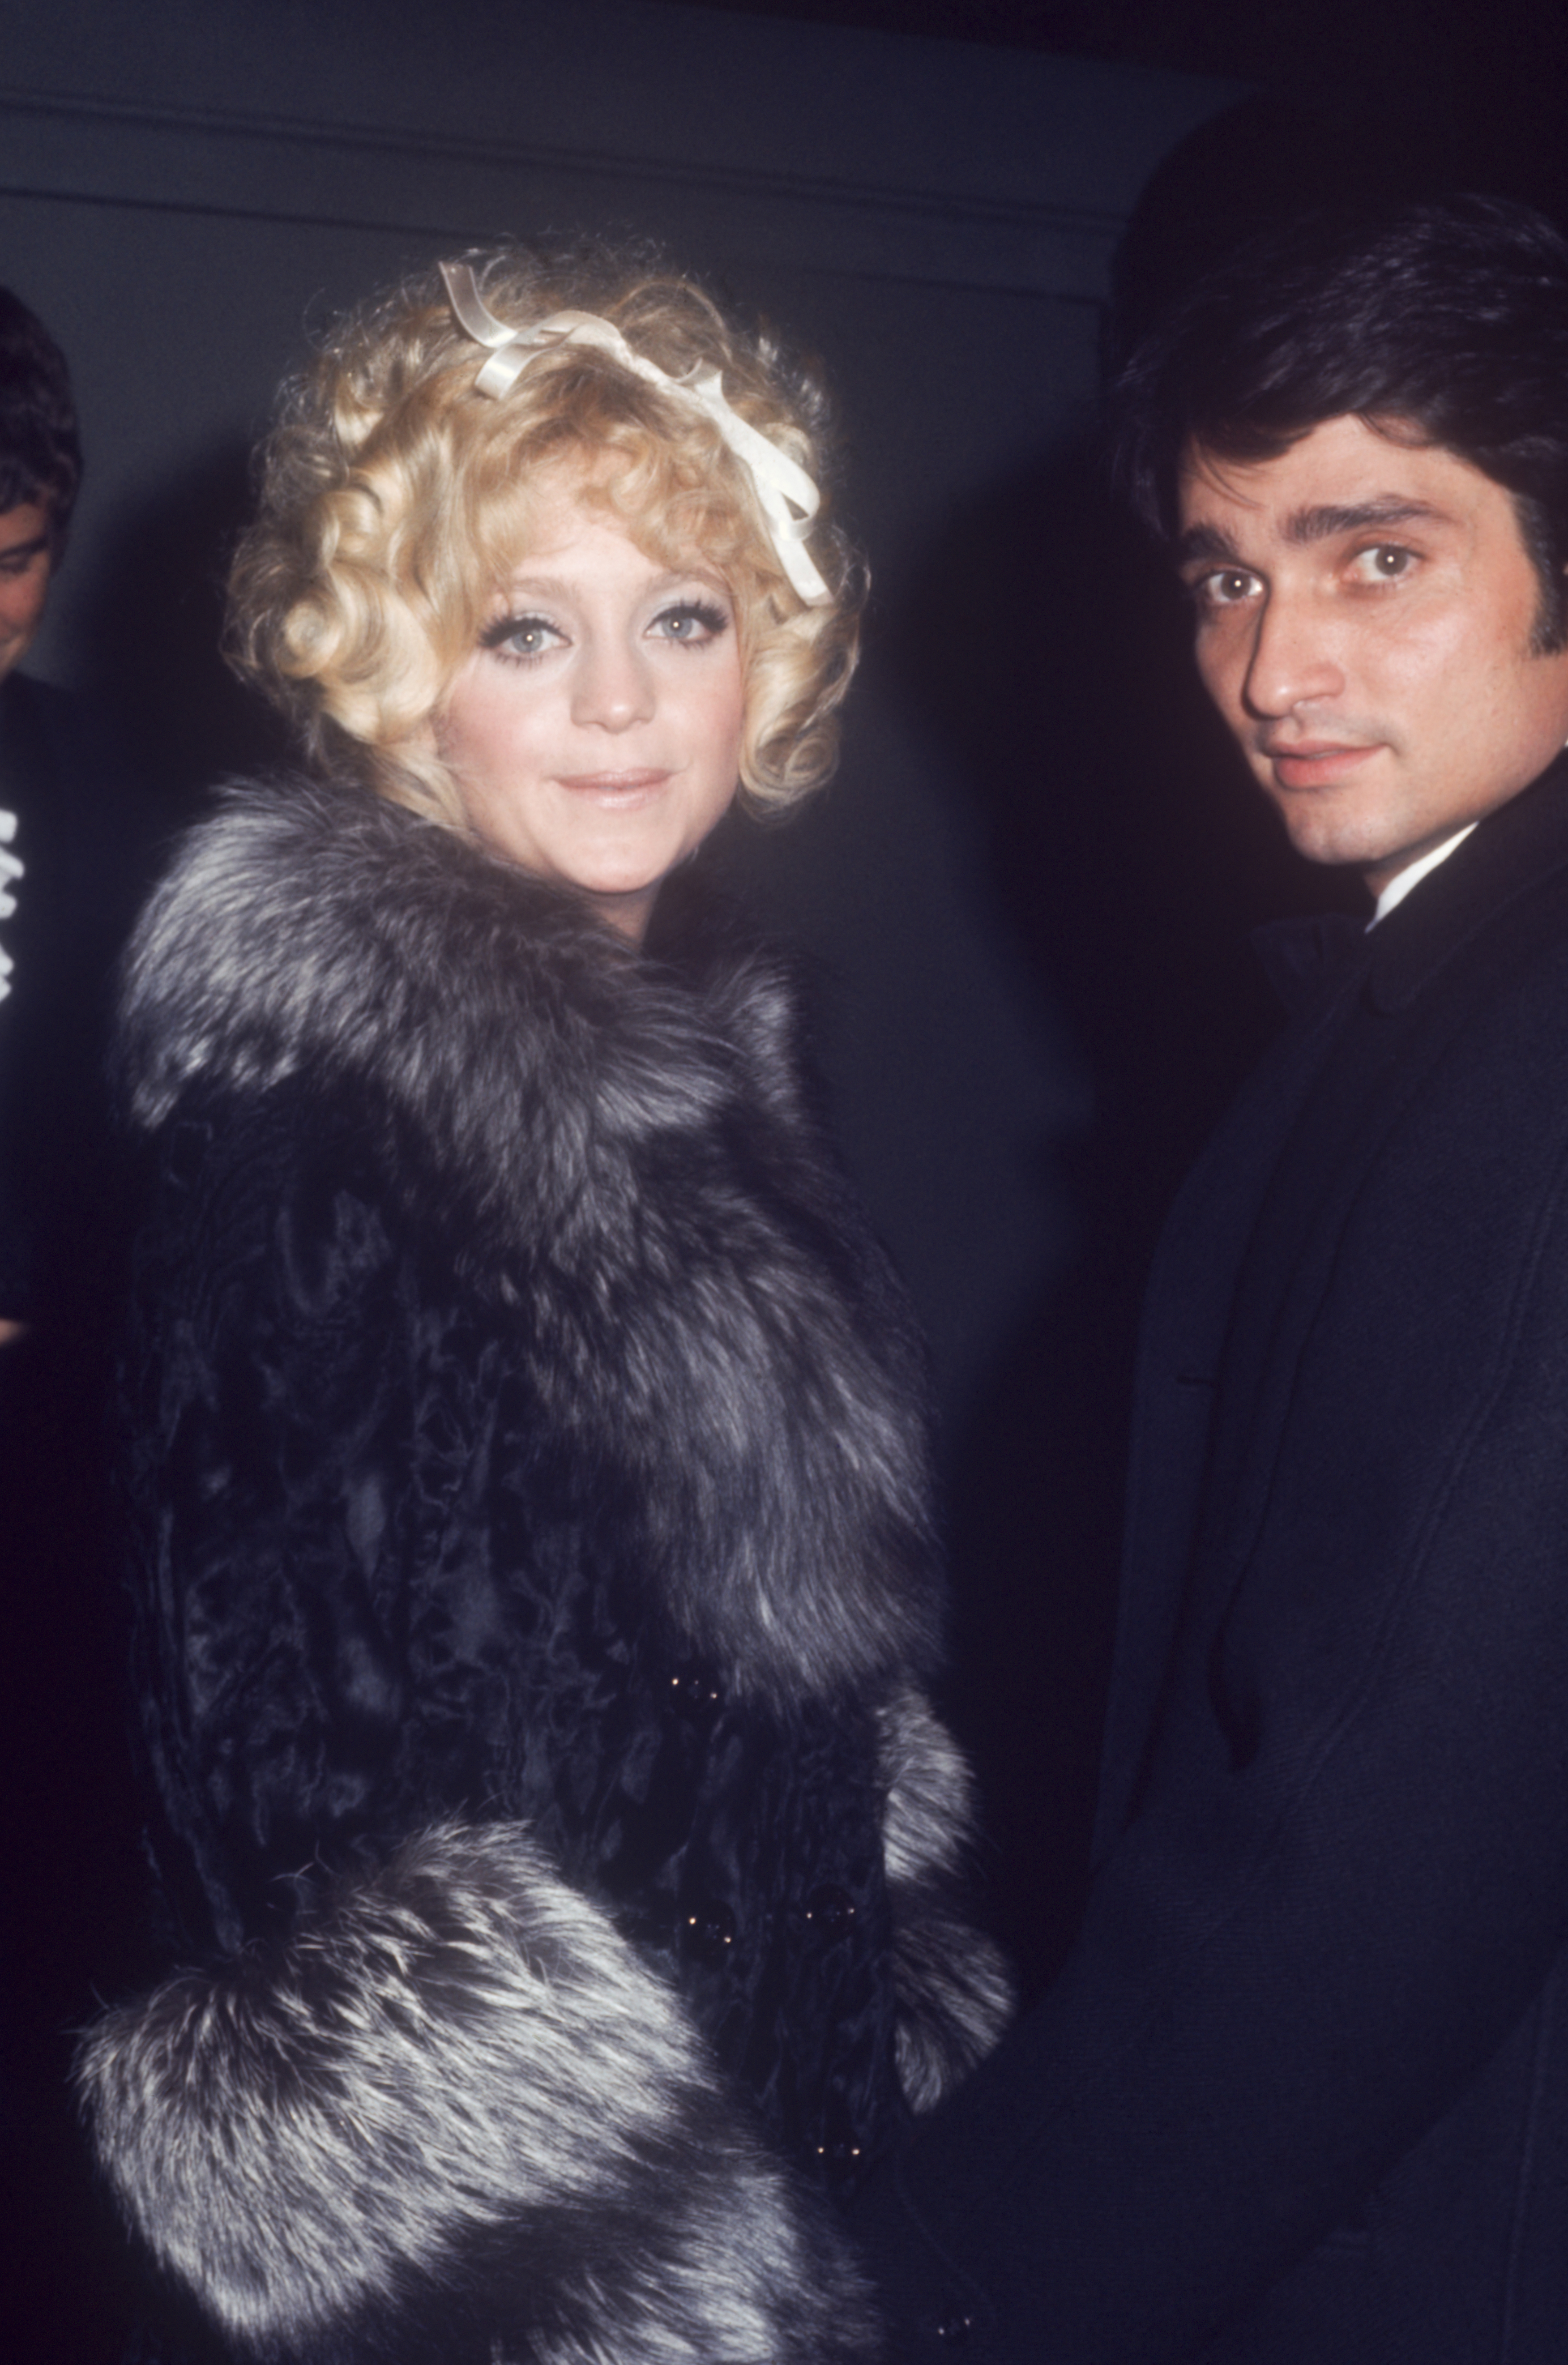 Goldie Hawn and Gus Trikonis captured in a photograph together in New York, 1970 | Source: Getty Images